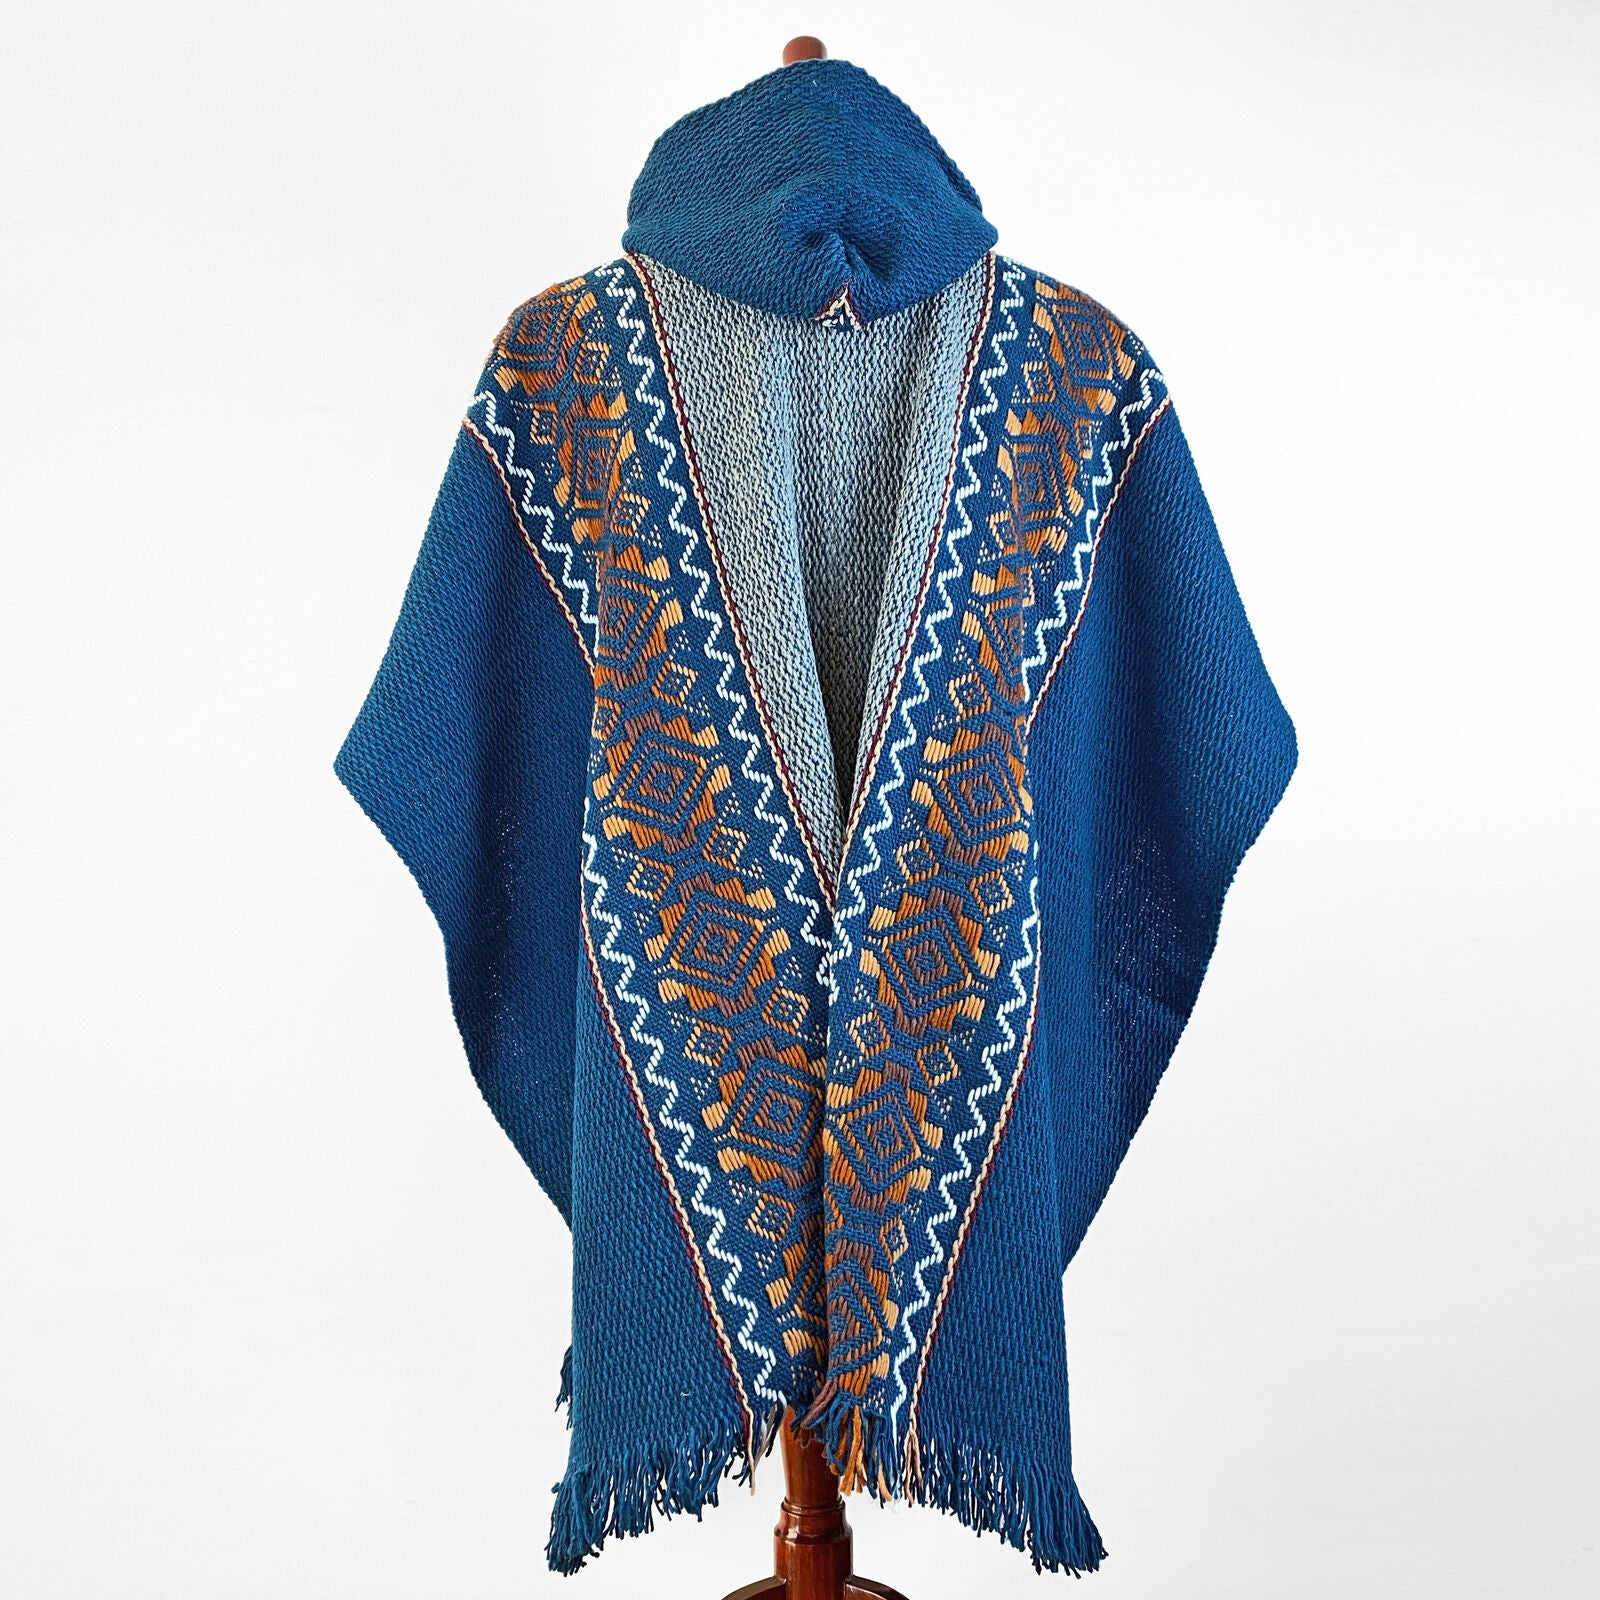 Llama Wool Unisex South American Handwoven Hooded Poncho - solid blue/gray with diamonds pattern